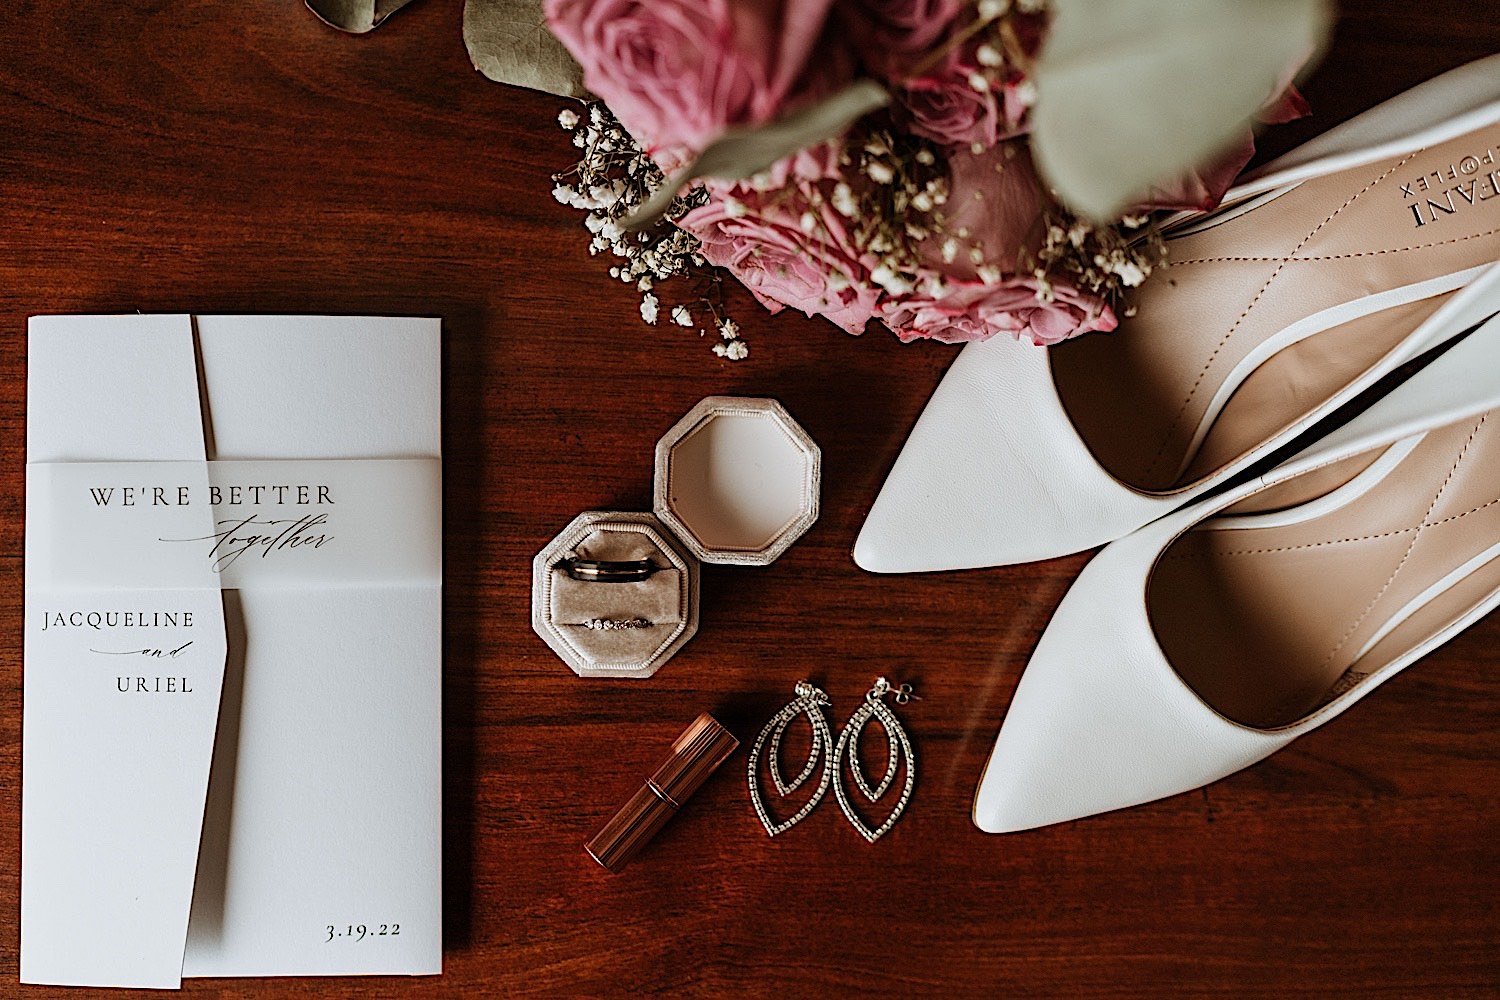 Photo of wedding rings, earrings, shoes, flowers and a wedding invite on a table